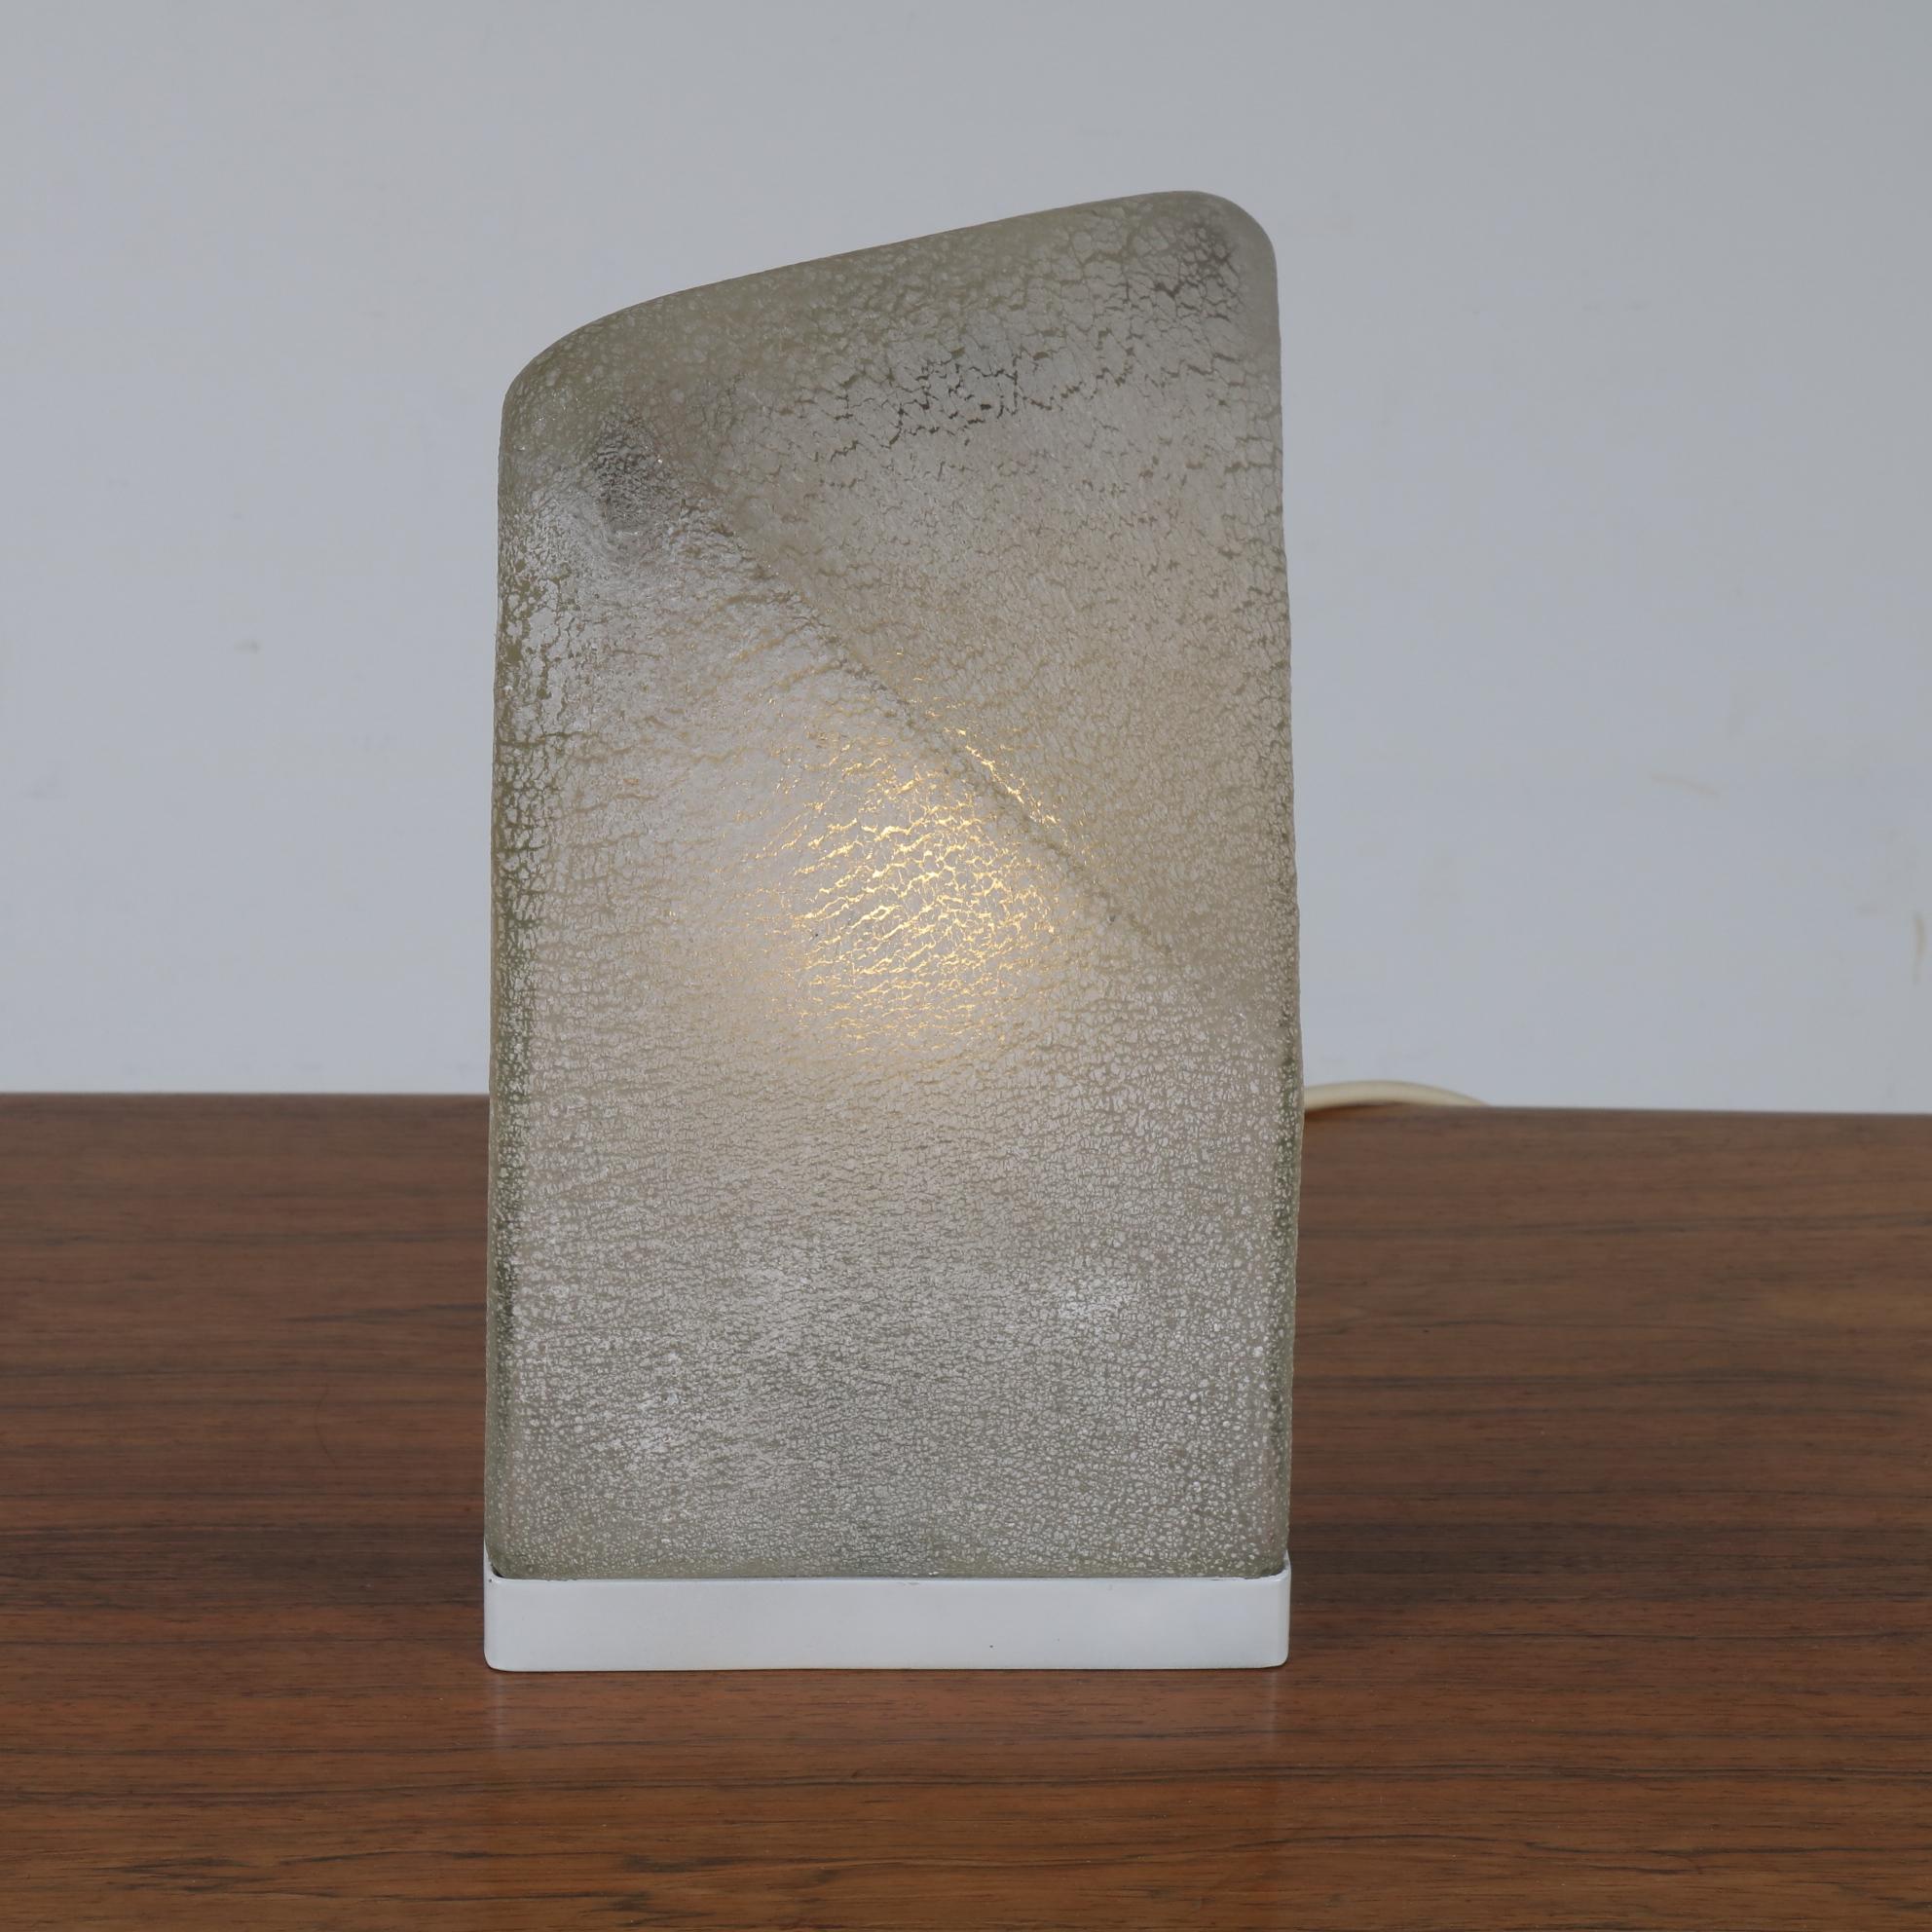 A beautiful glass table lamp, designed and signed by Alfredo Barbini, made in Italy.

This wonderful piece is made of the highest quality textured glass in a nice geometric shape. It will beautifully compliment any decor and is a very decorative